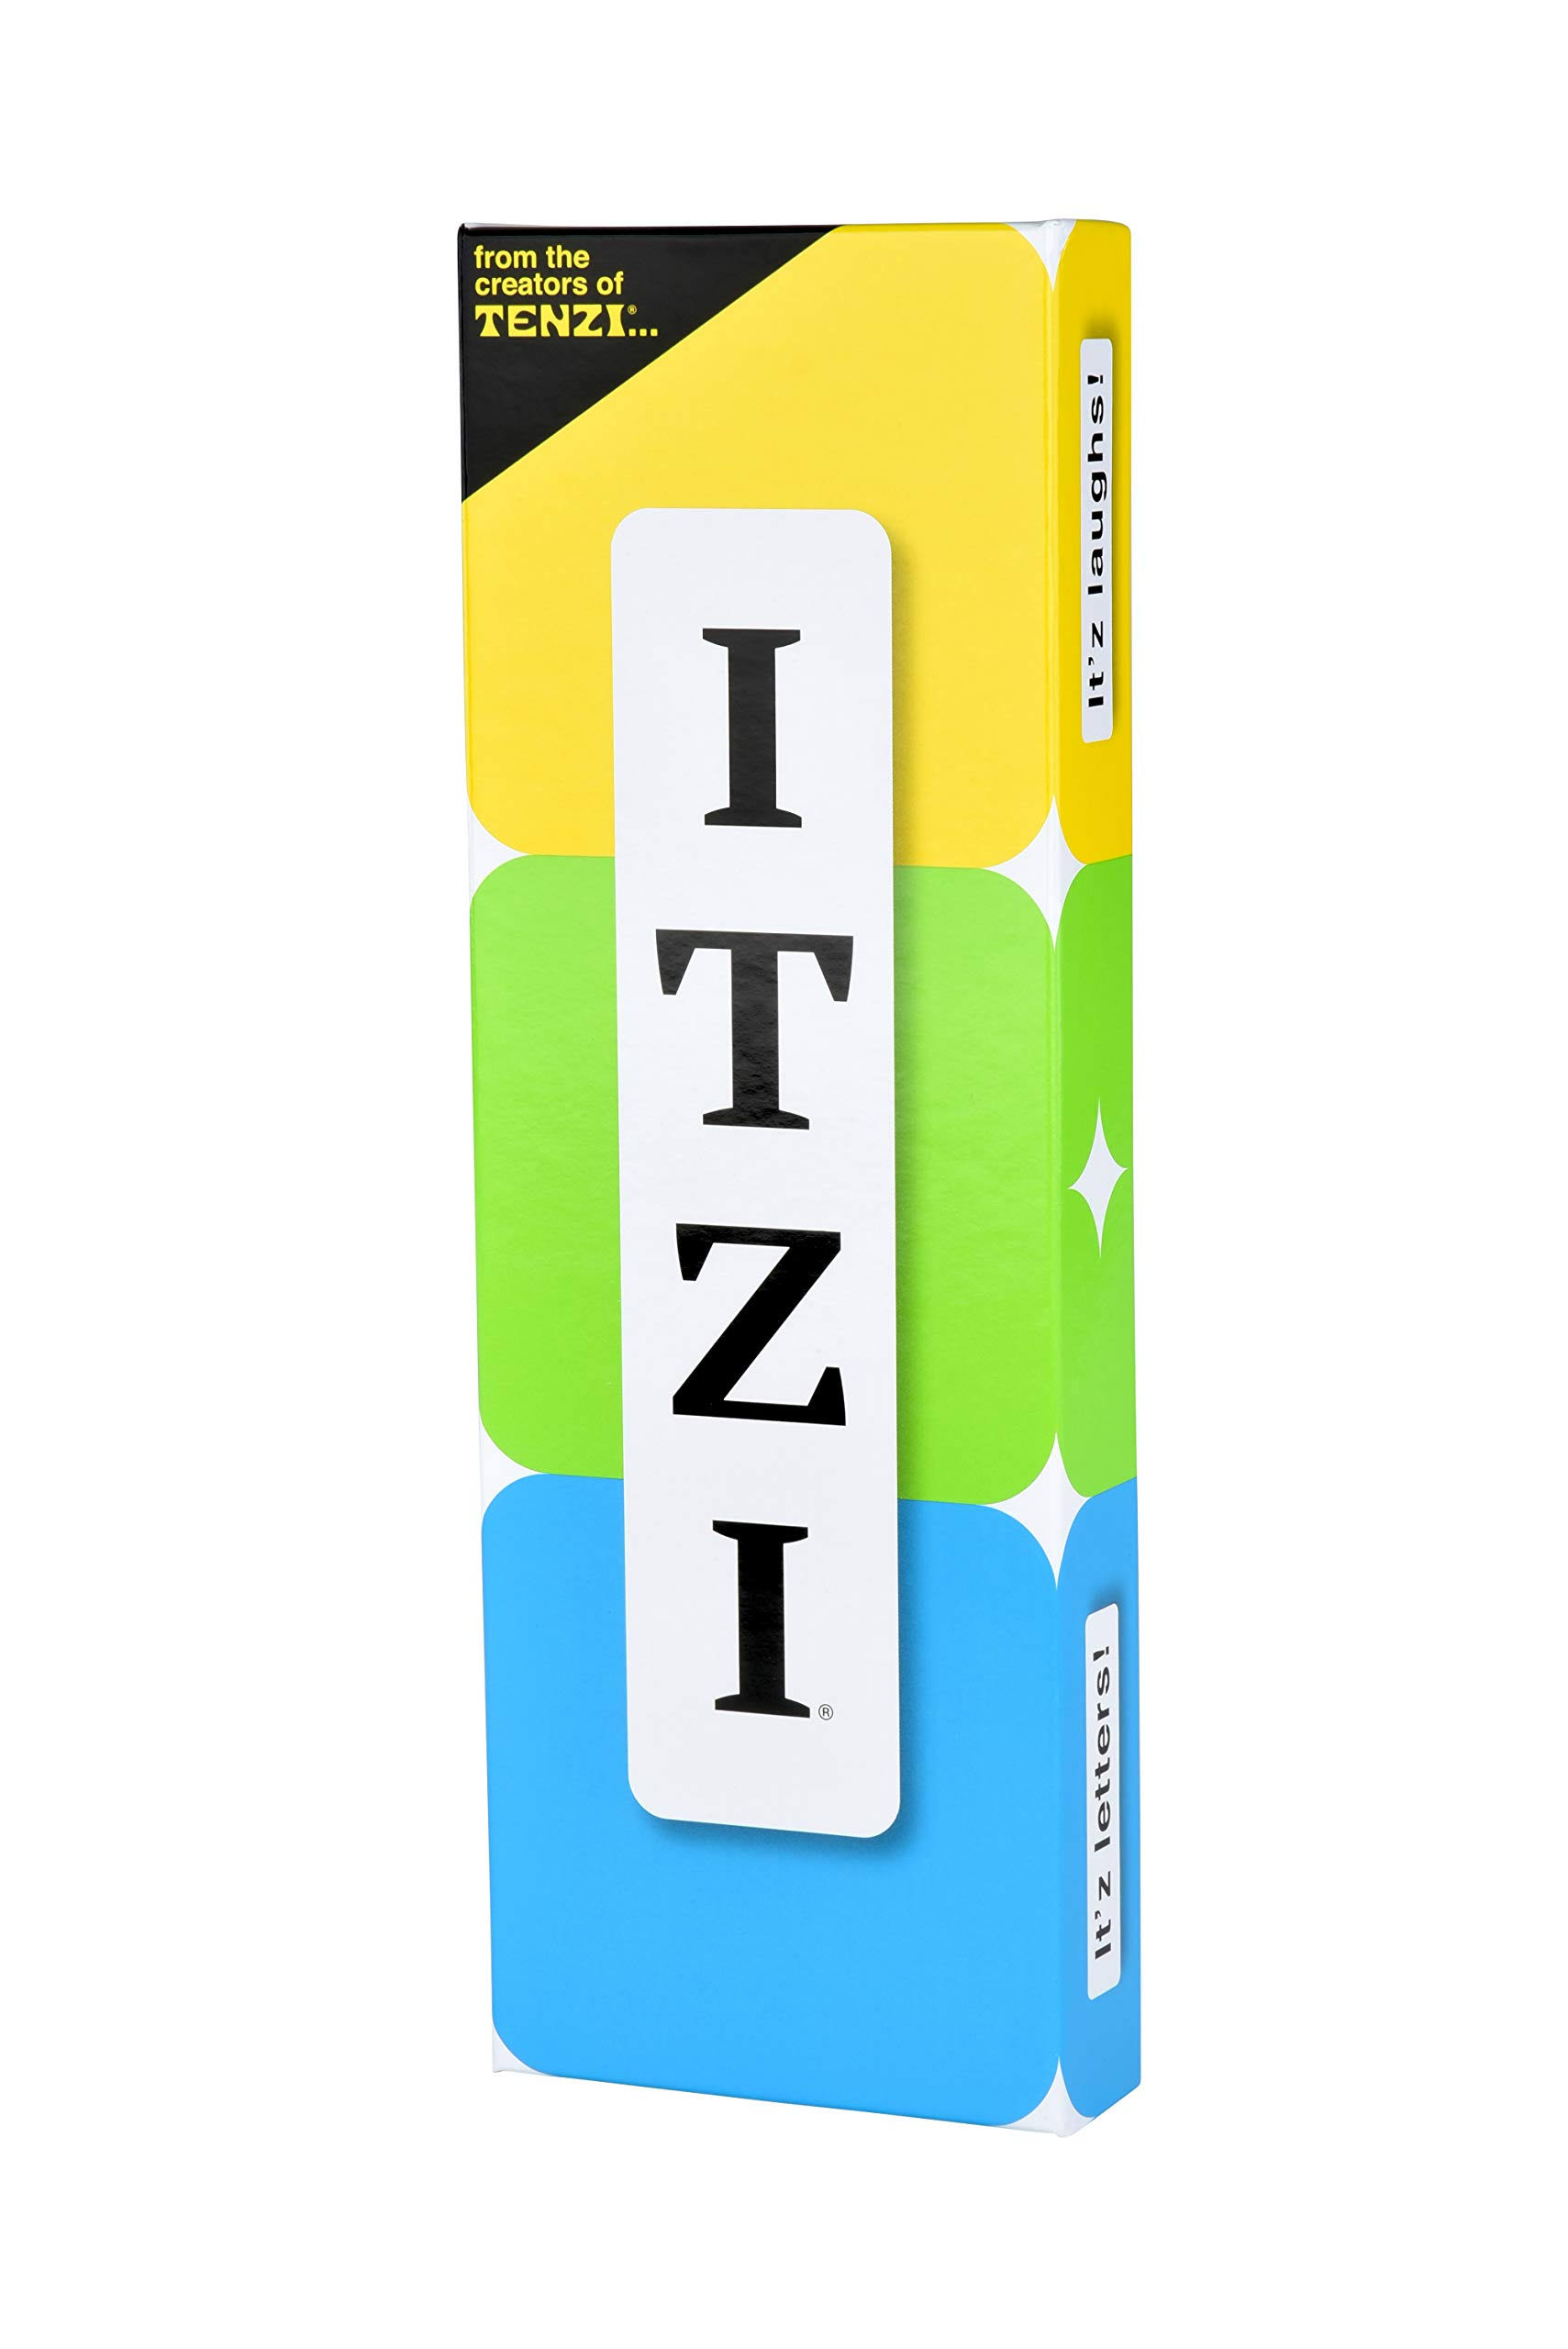 TENZI ITZI - The Fast, Fun, and Creative Word Matching Family and Part